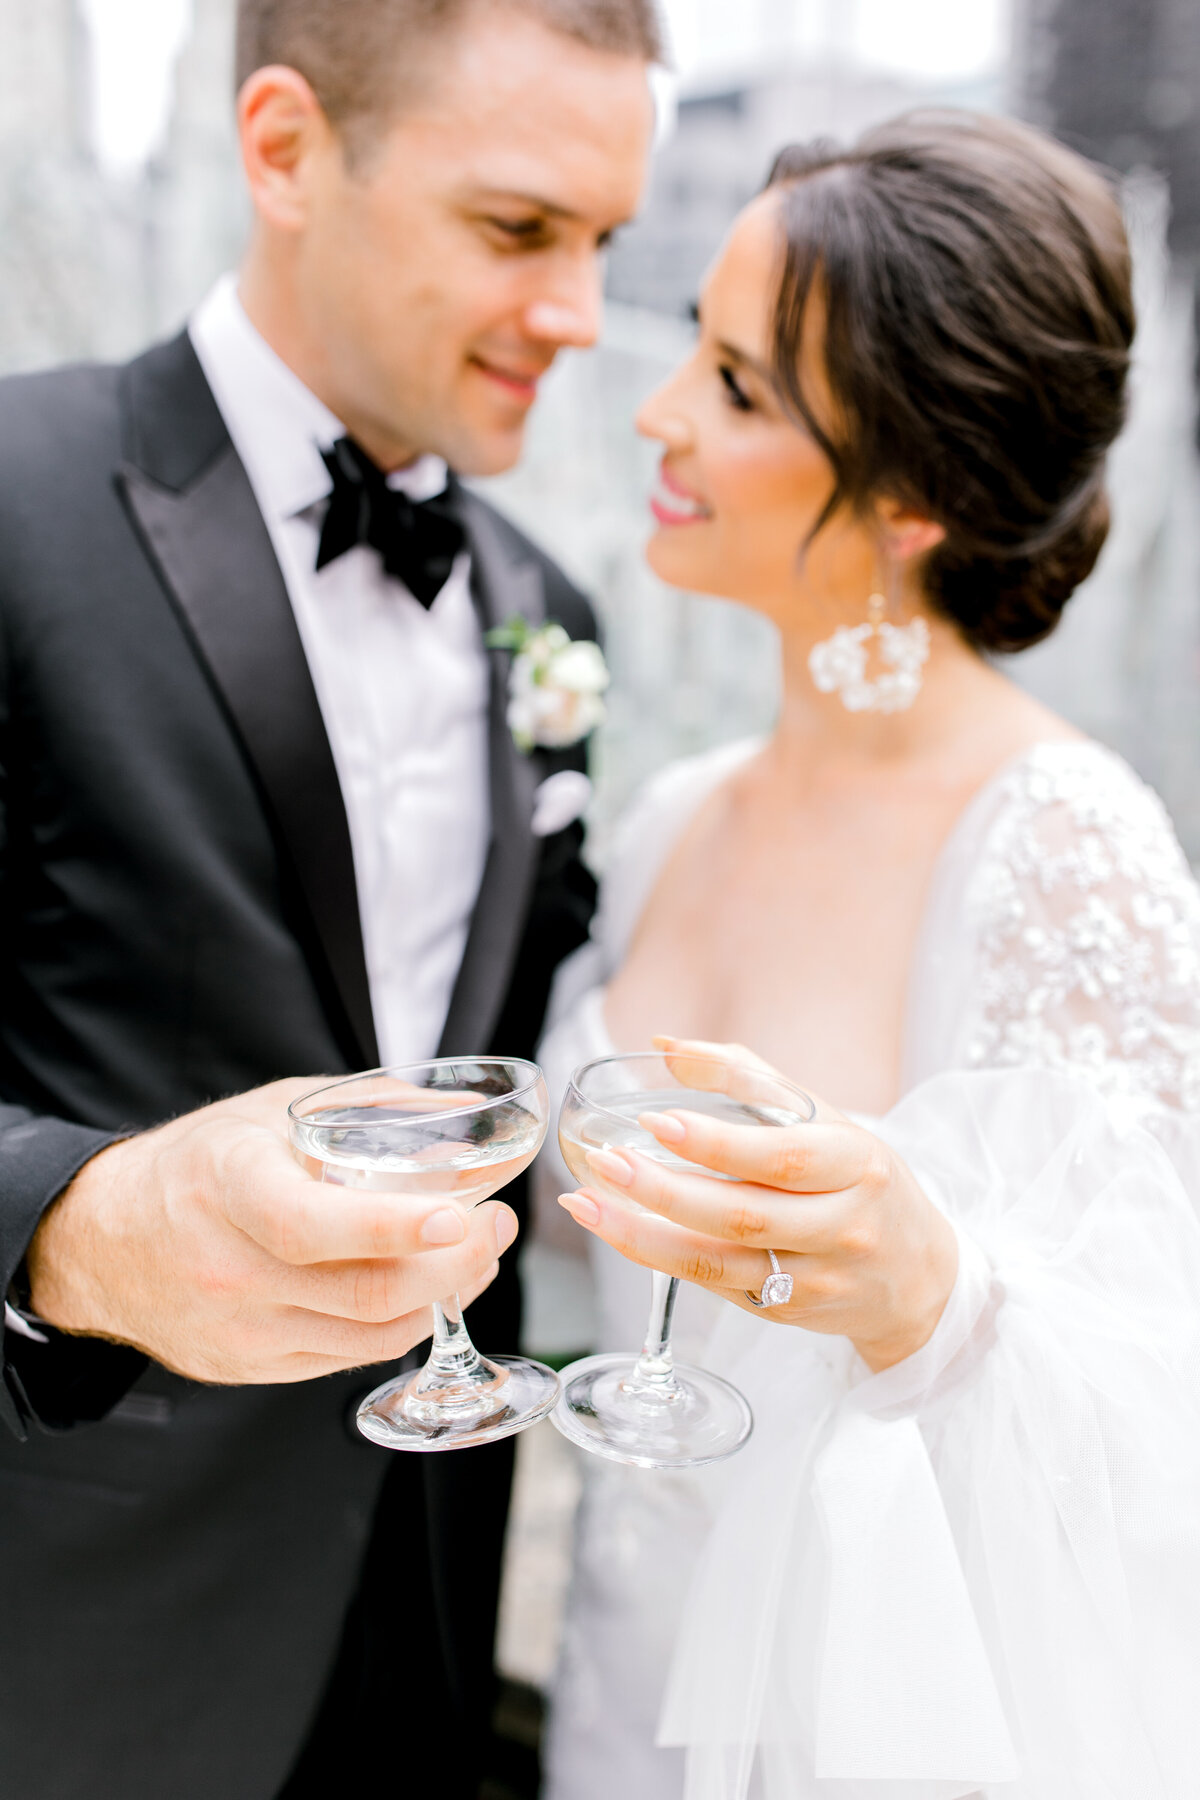 620 Loft and Garden Weddings in NYC | Maggie and Chris